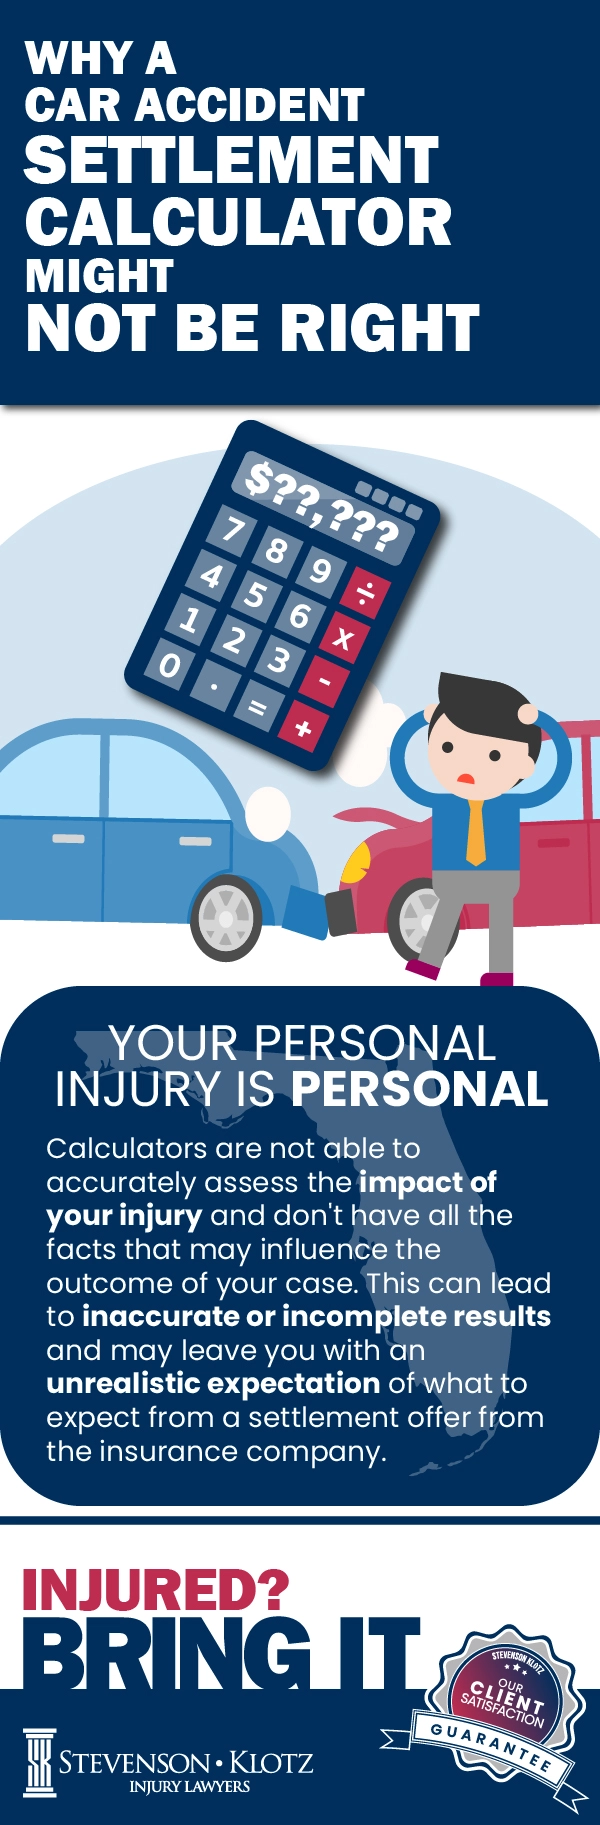 Why a Car Accident Settlement Calculator Might Not Be Right Infographic